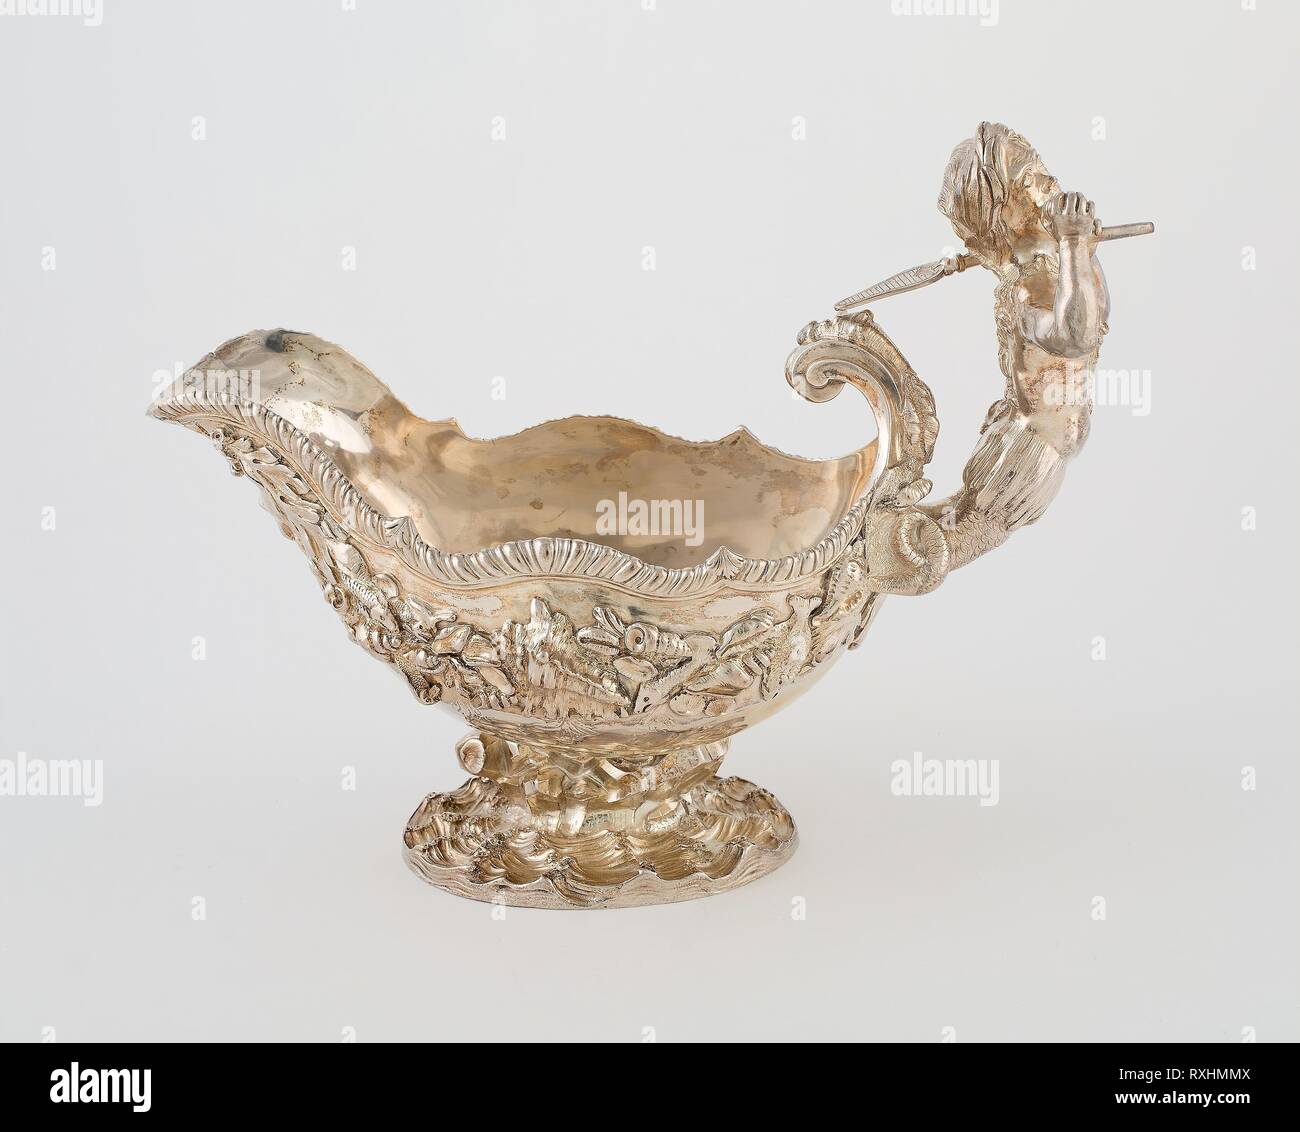 Sauceboat. Peter Archambo I; English, 1680-1768; London, England. Date: 1745-1746. Dimensions: H. 19.4 cm (7 5/8 in.). Silver. Origin: London. Museum: The Chicago Art Institute. Stock Photo